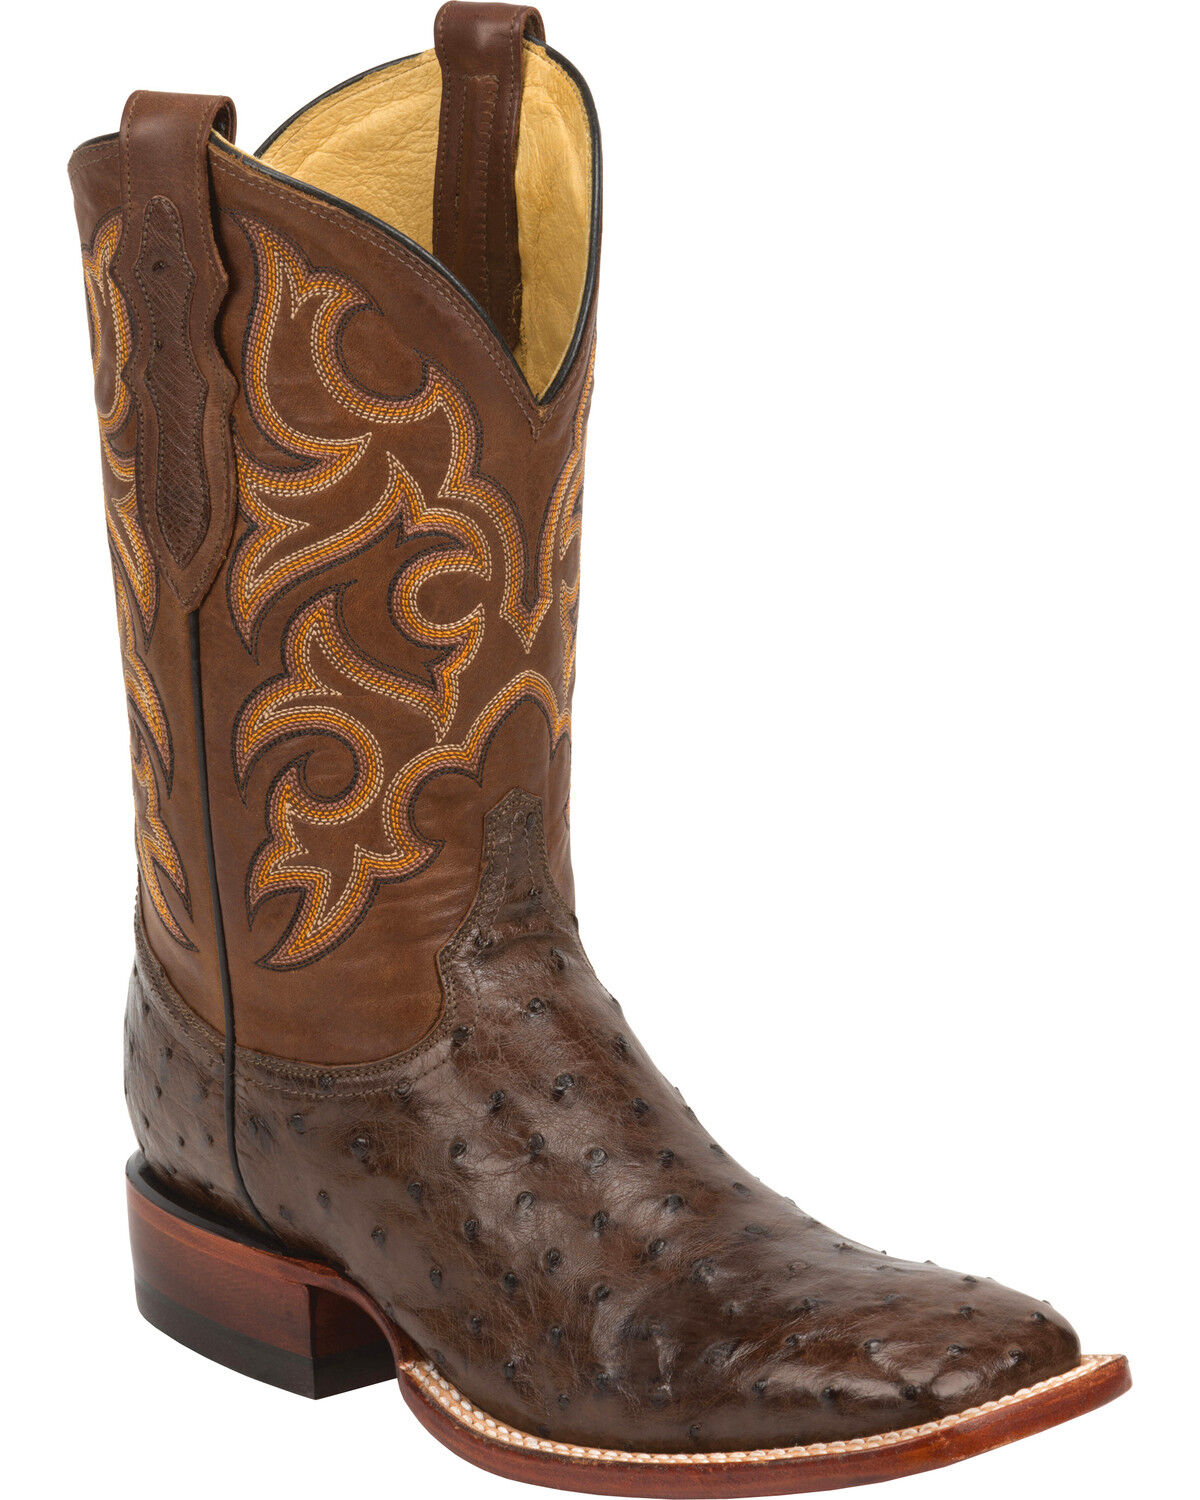 justin boots men's ropers equestrian boot